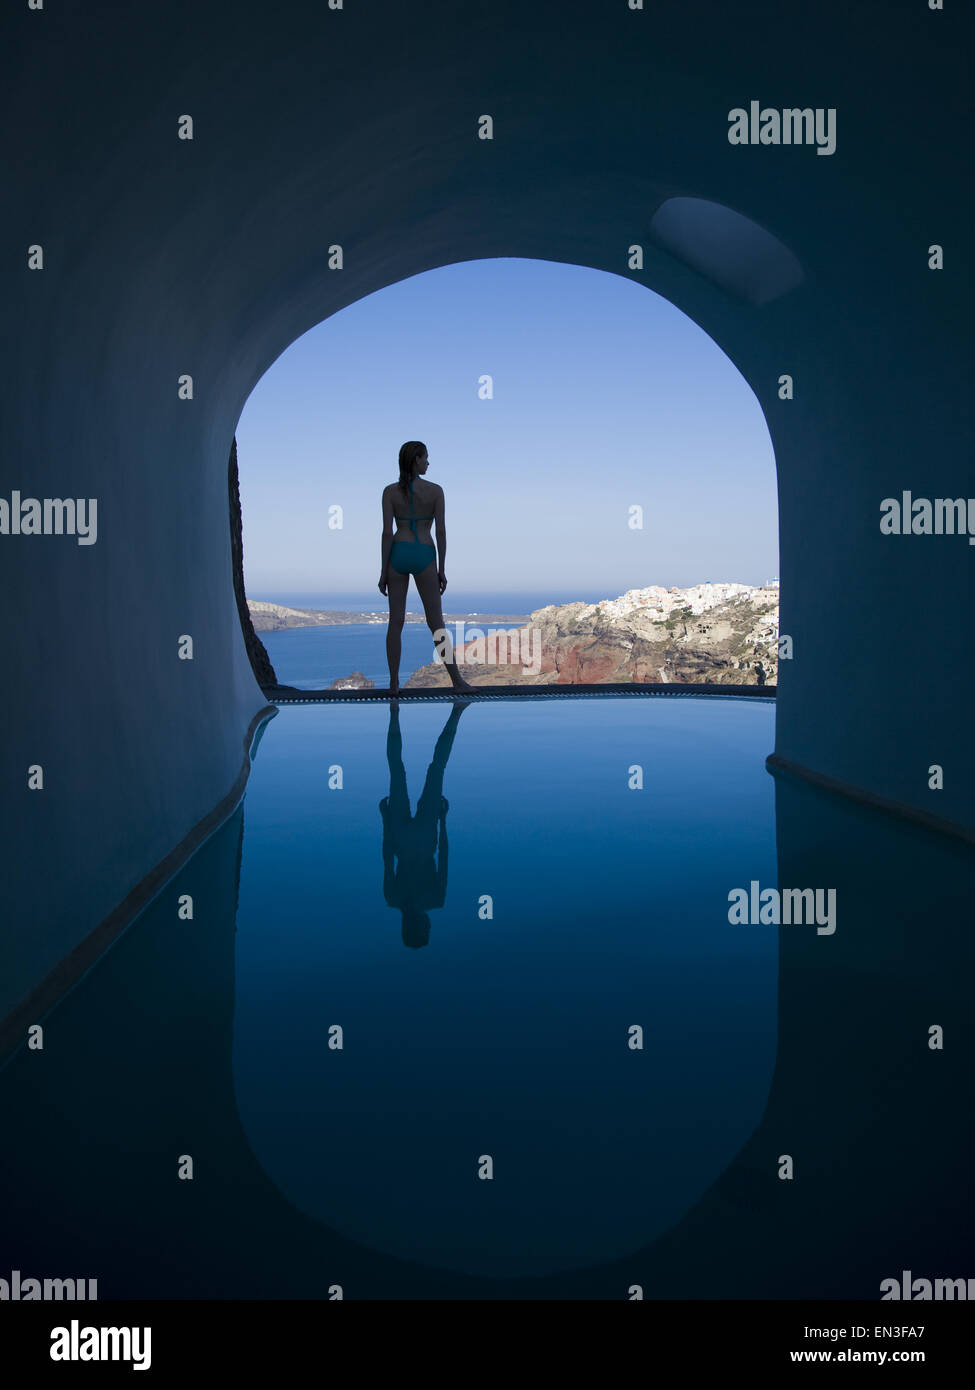 Silhouette rear view of woman in bikini standing at edge of infinity pool with arch and rock formation Stock Photo